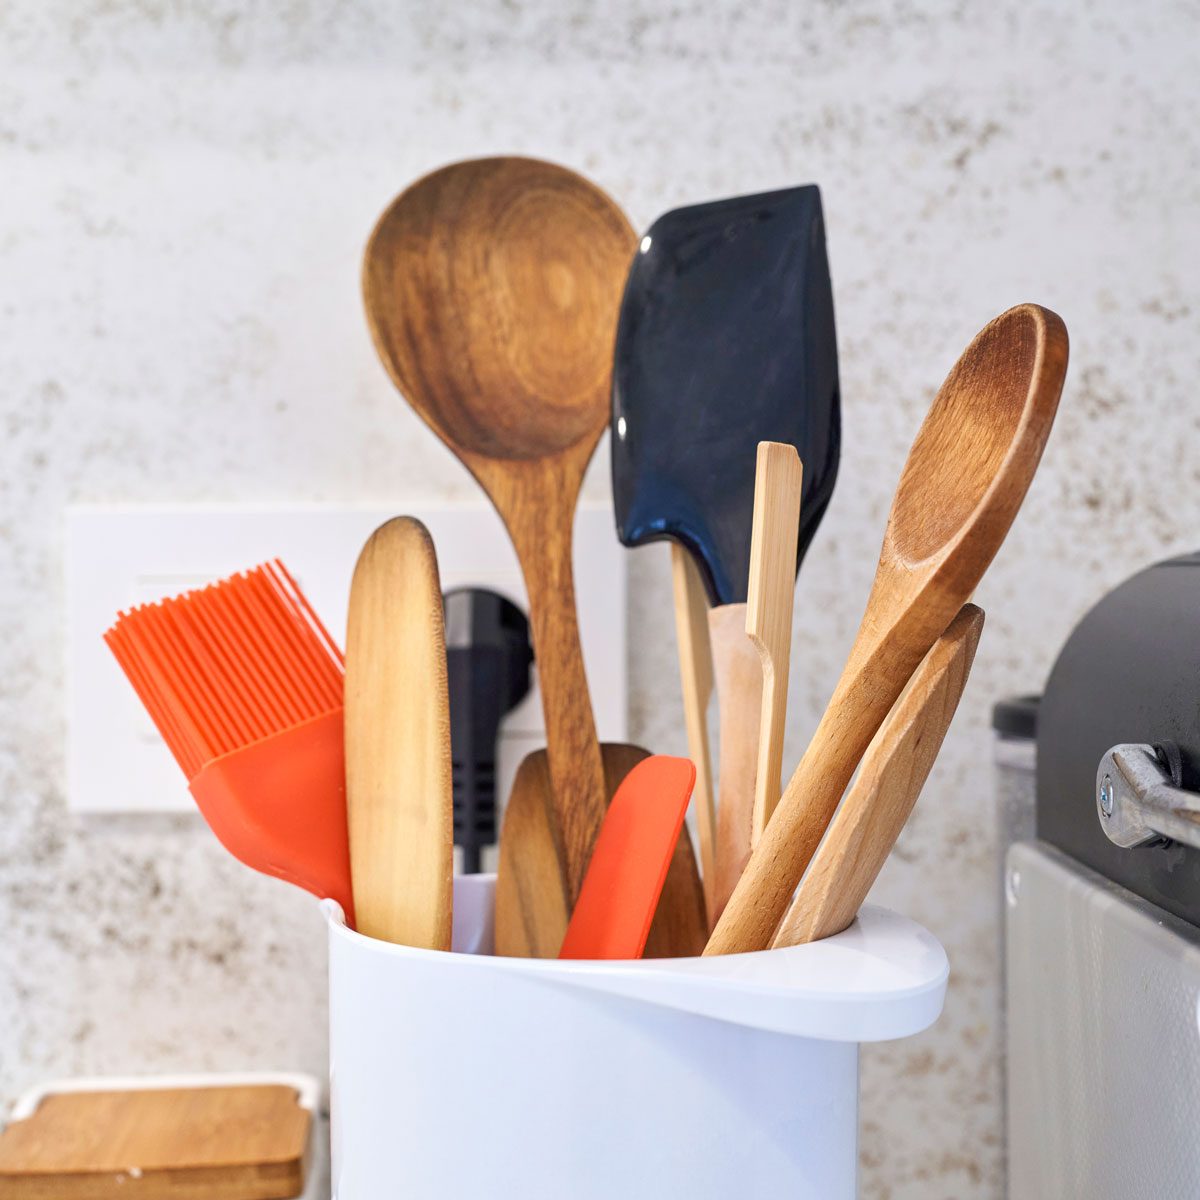 Close Up Of Different Kitchen Utensils Inside White Container